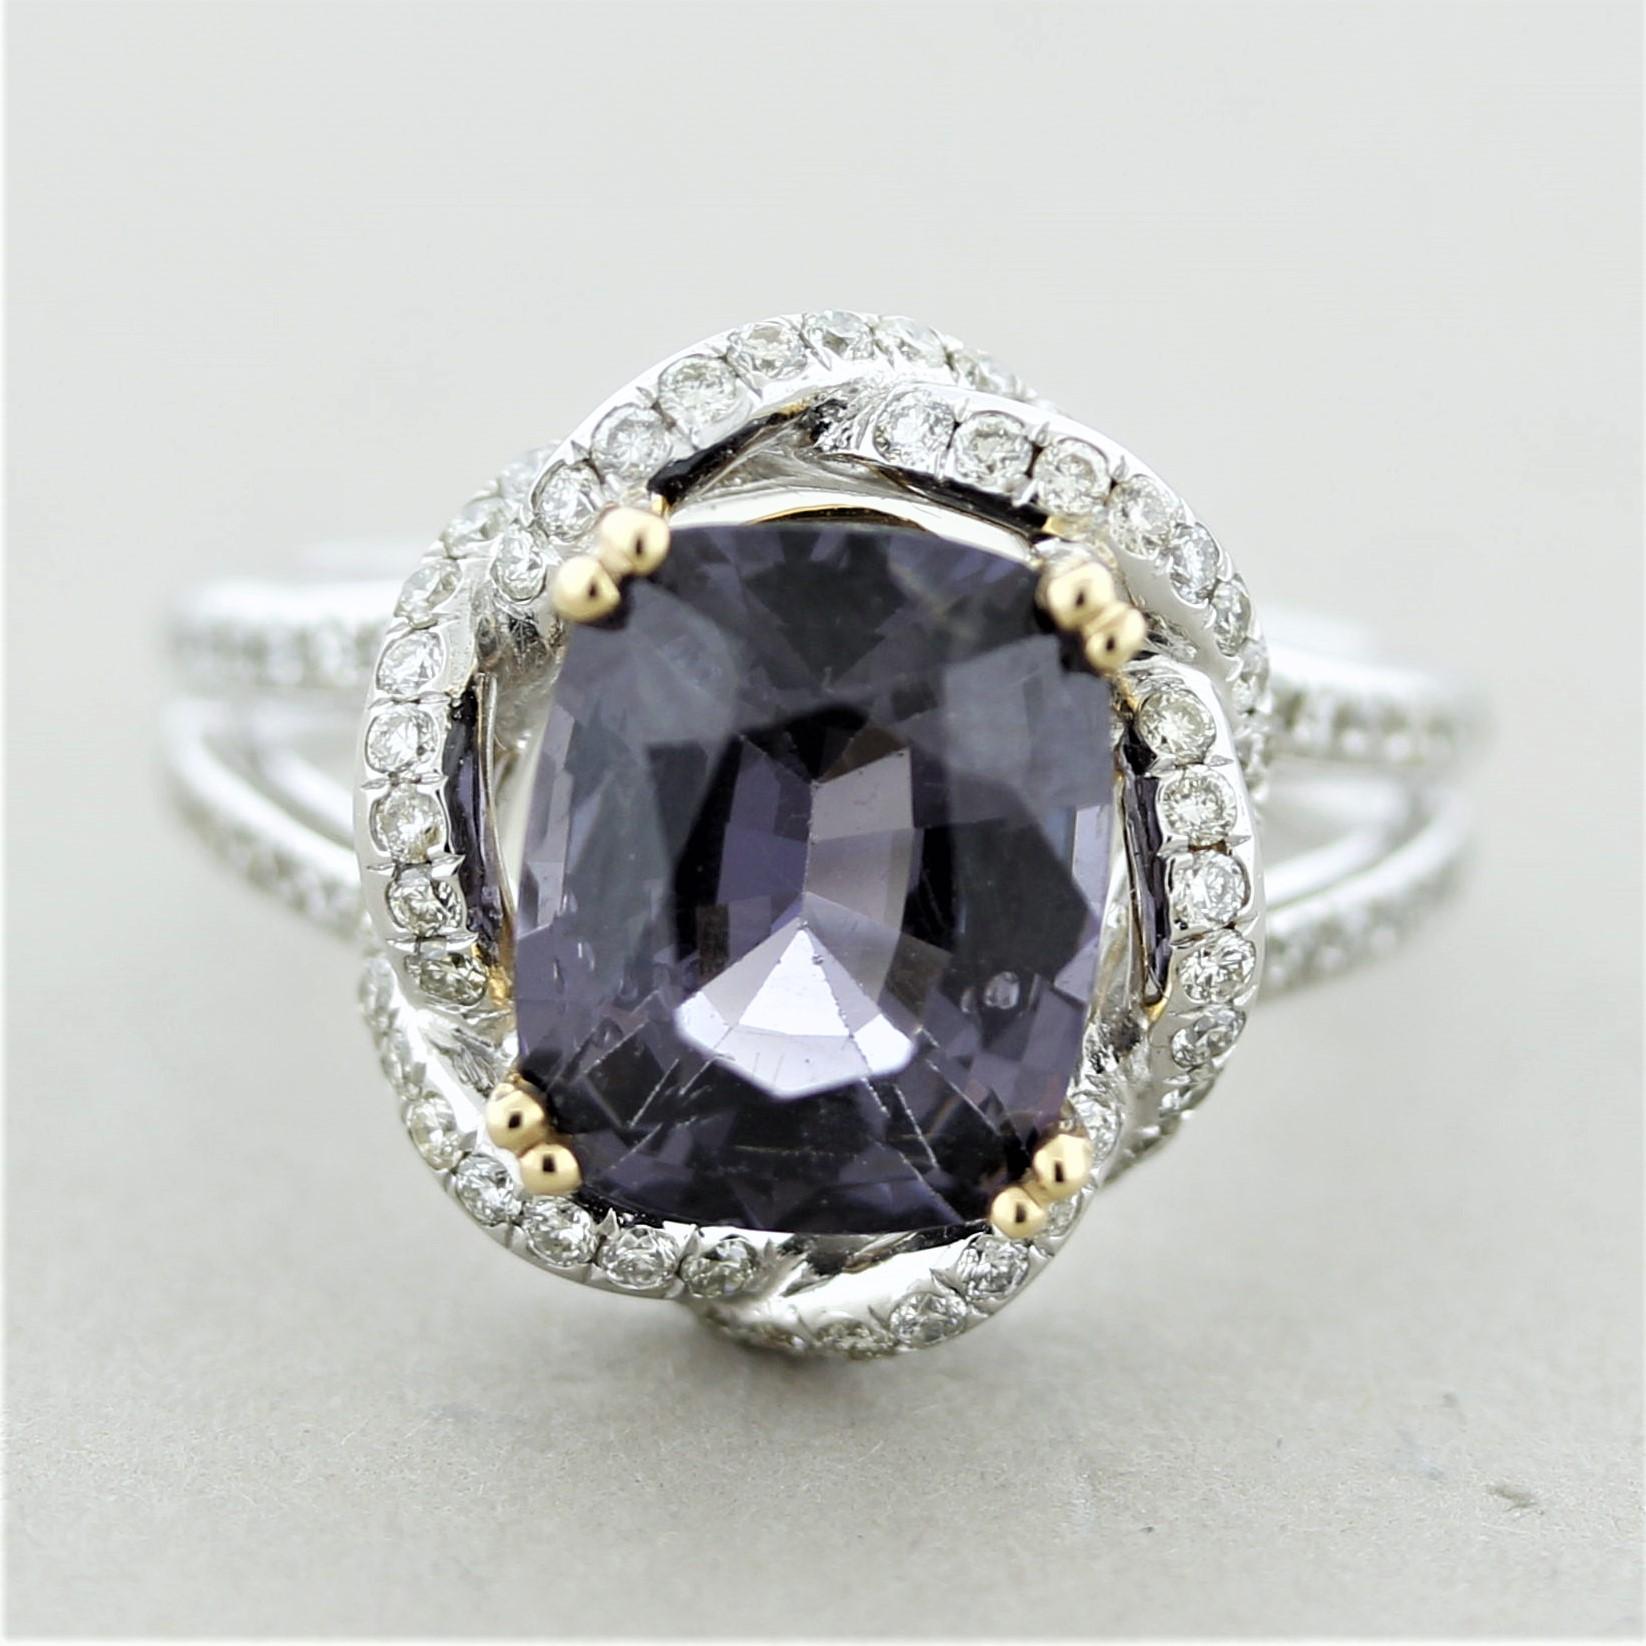 An impressive and stylish ring featuring a 4.31 carat cushion-shaped spinel. It has a soft metallic purple color that is bright and clean. It is accented by 0.74 carats of round brilliant-cut diamonds set spiraling around the spinel and down the